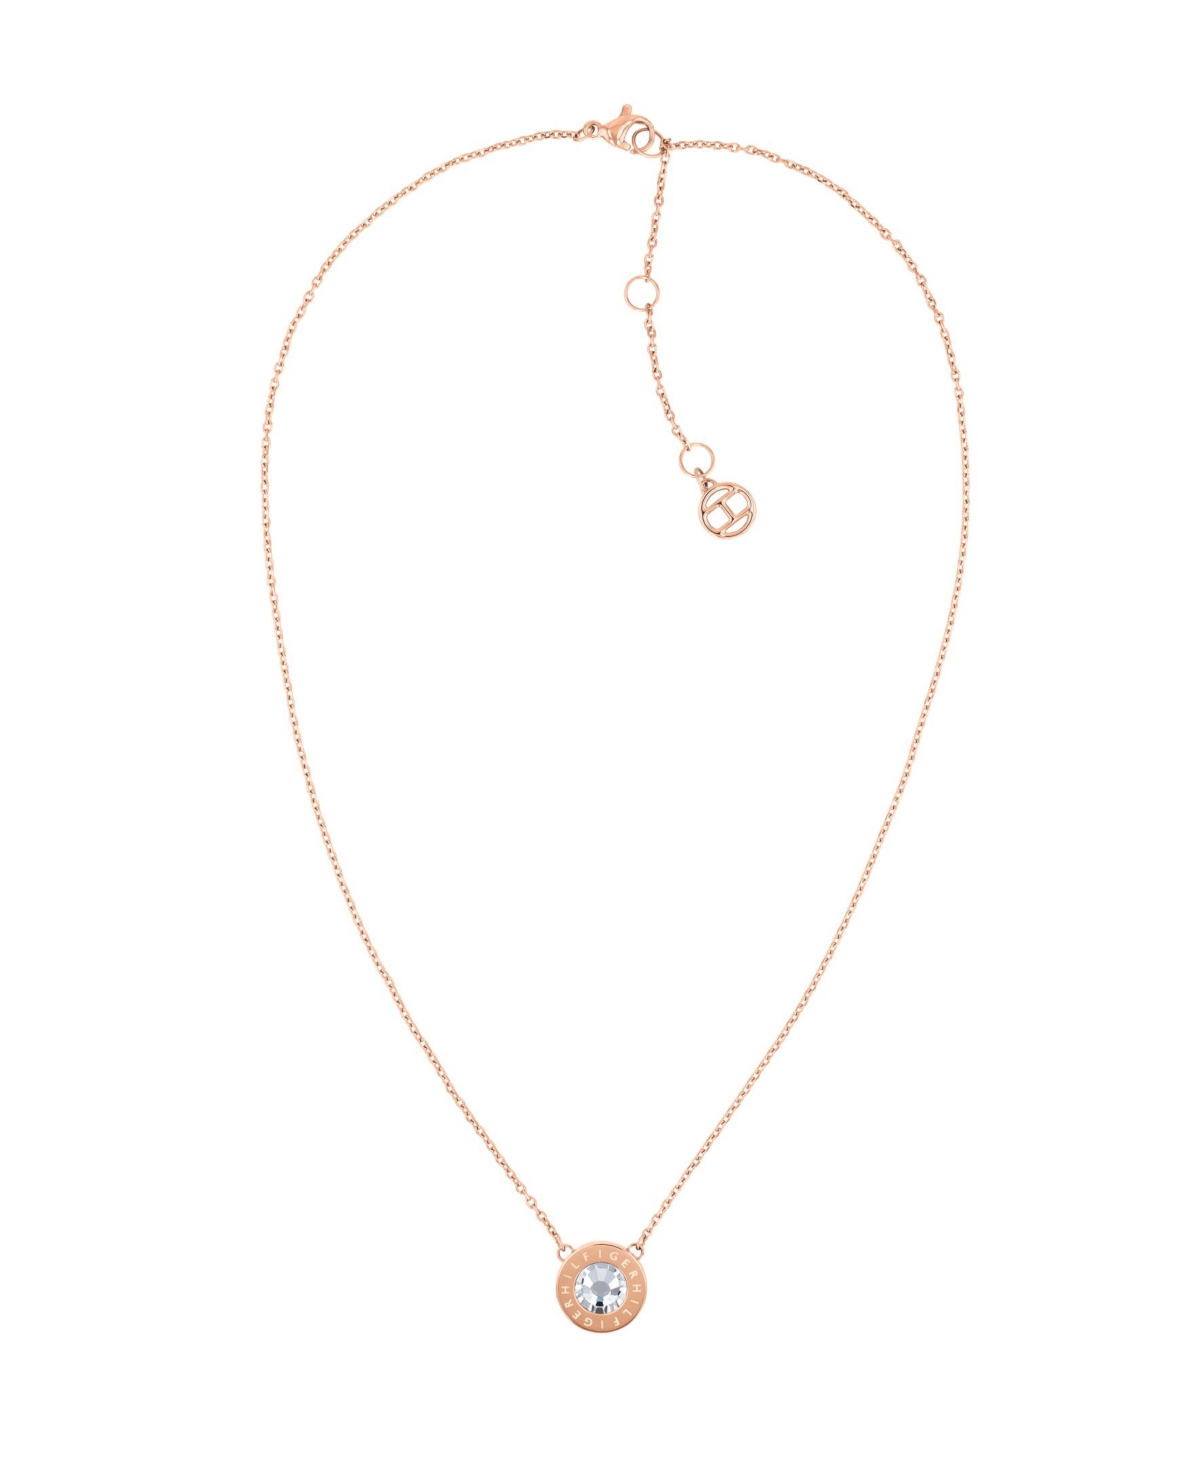 Women's Stone Necklace - Rose Gold-Tone